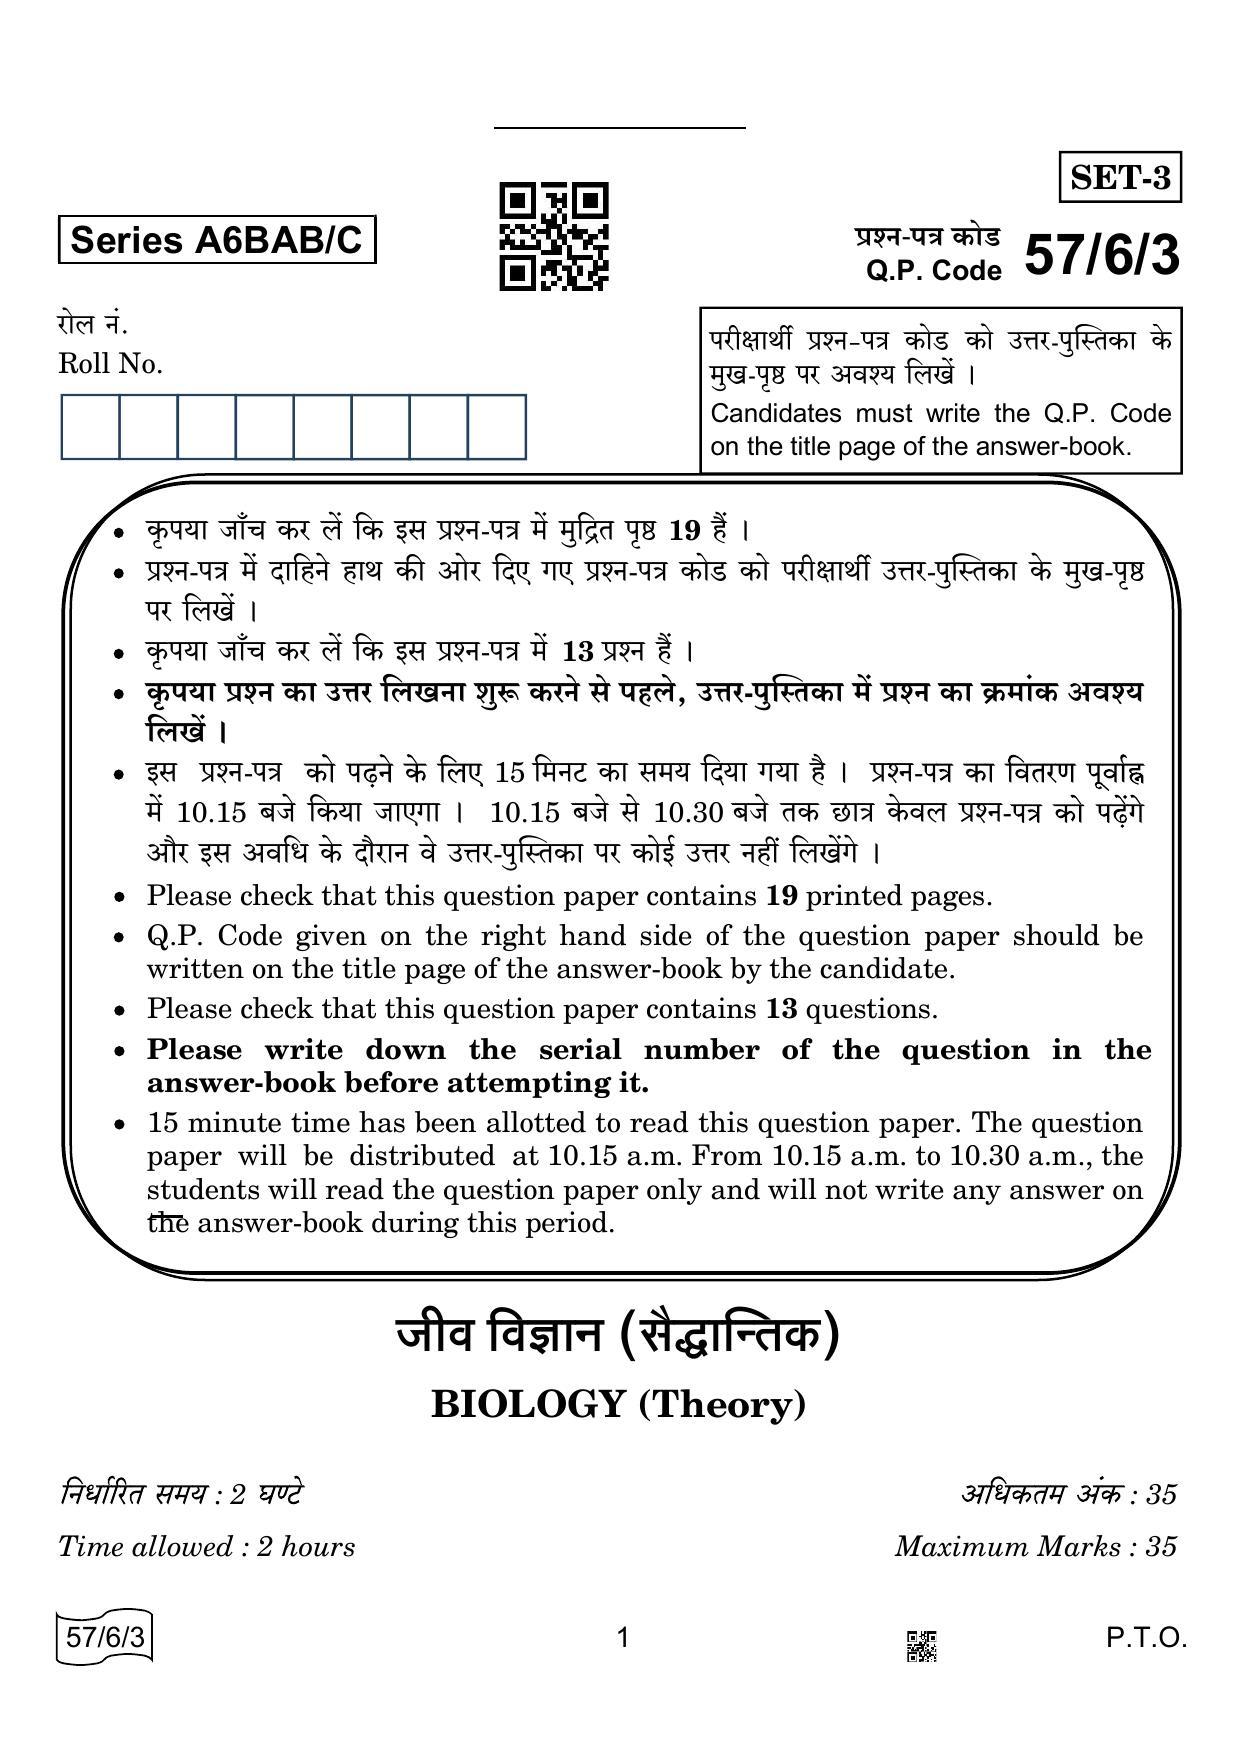 CBSE Class 12 57-6-3 BIOLOGY 2022 Compartment Question Paper - Page 1